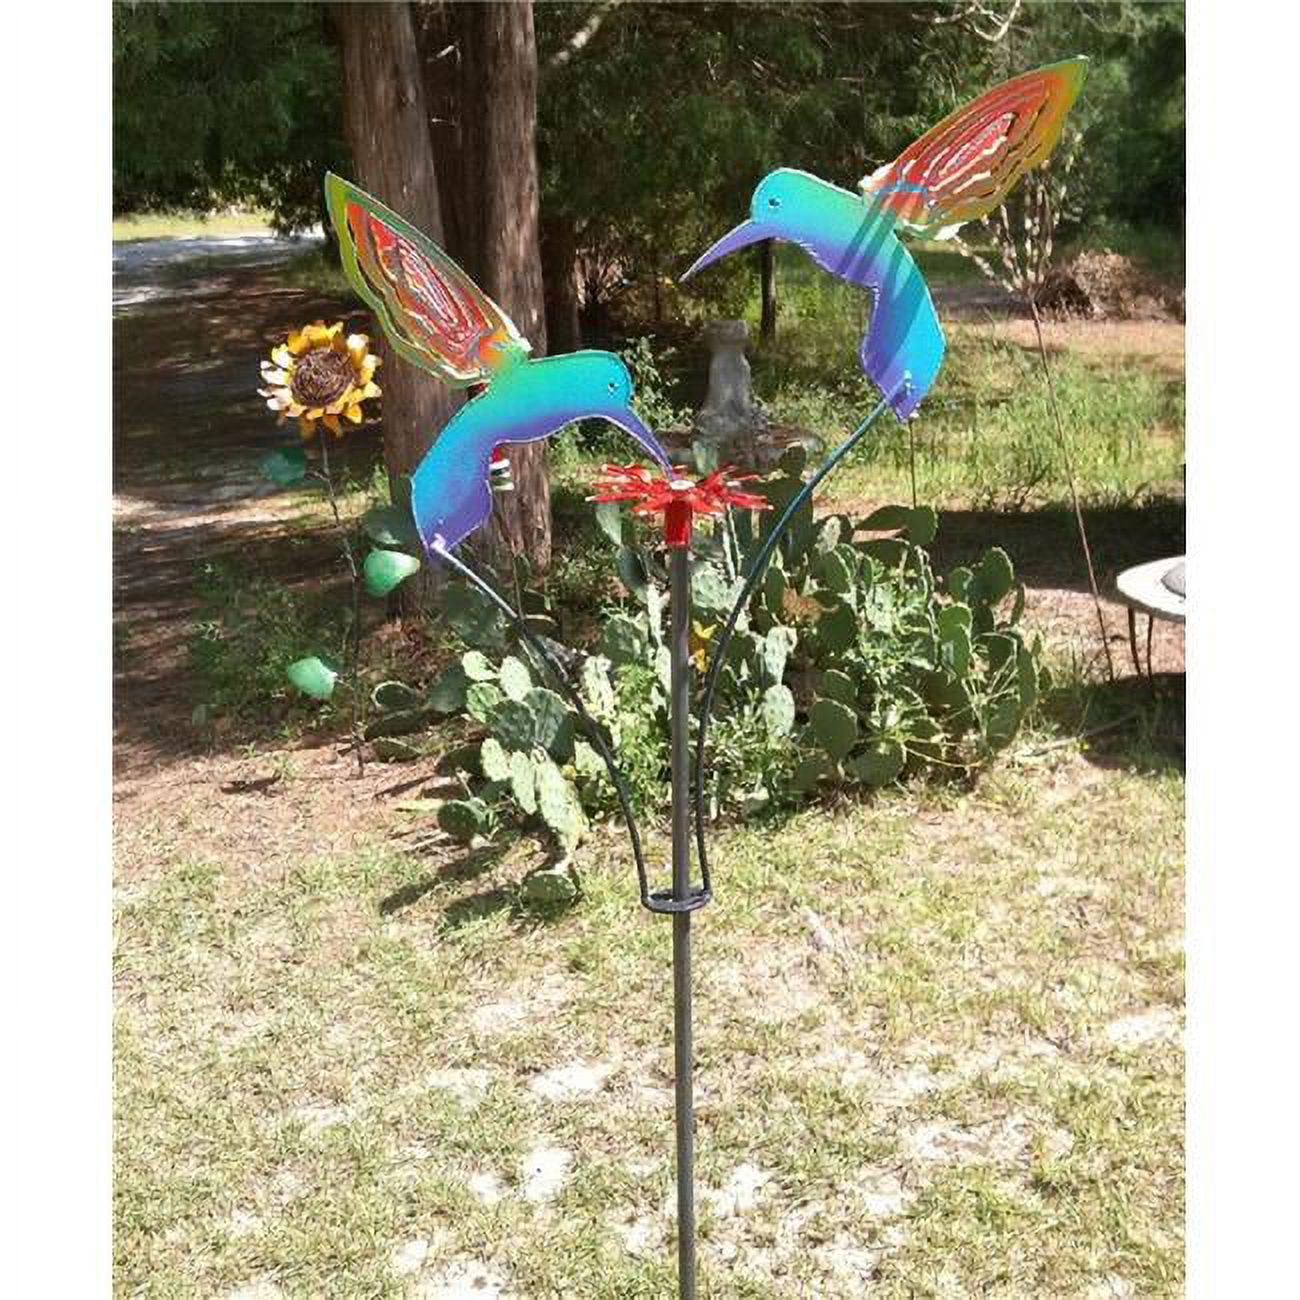 The Lazy Scroll  Metal Kinetic Garden Sculpture 2 Painted Hummingbirds - image 1 of 1